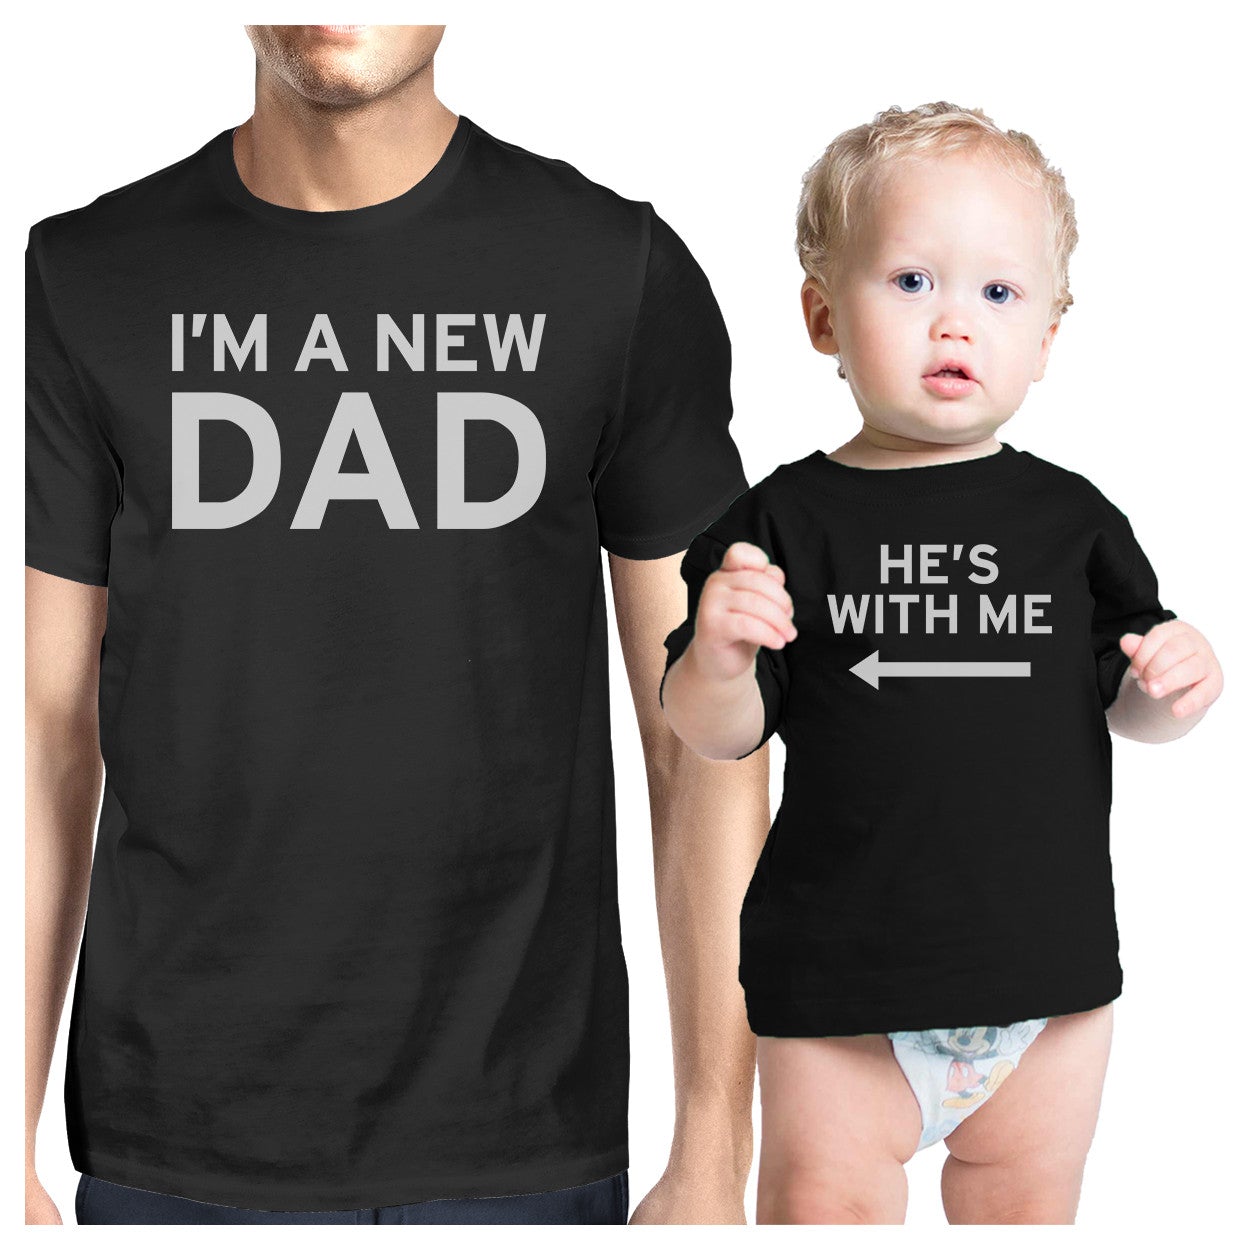 I'M A New Dad Black Dad And Baby Shirt Funny Baby Shower Gift Idea - 365 In Love